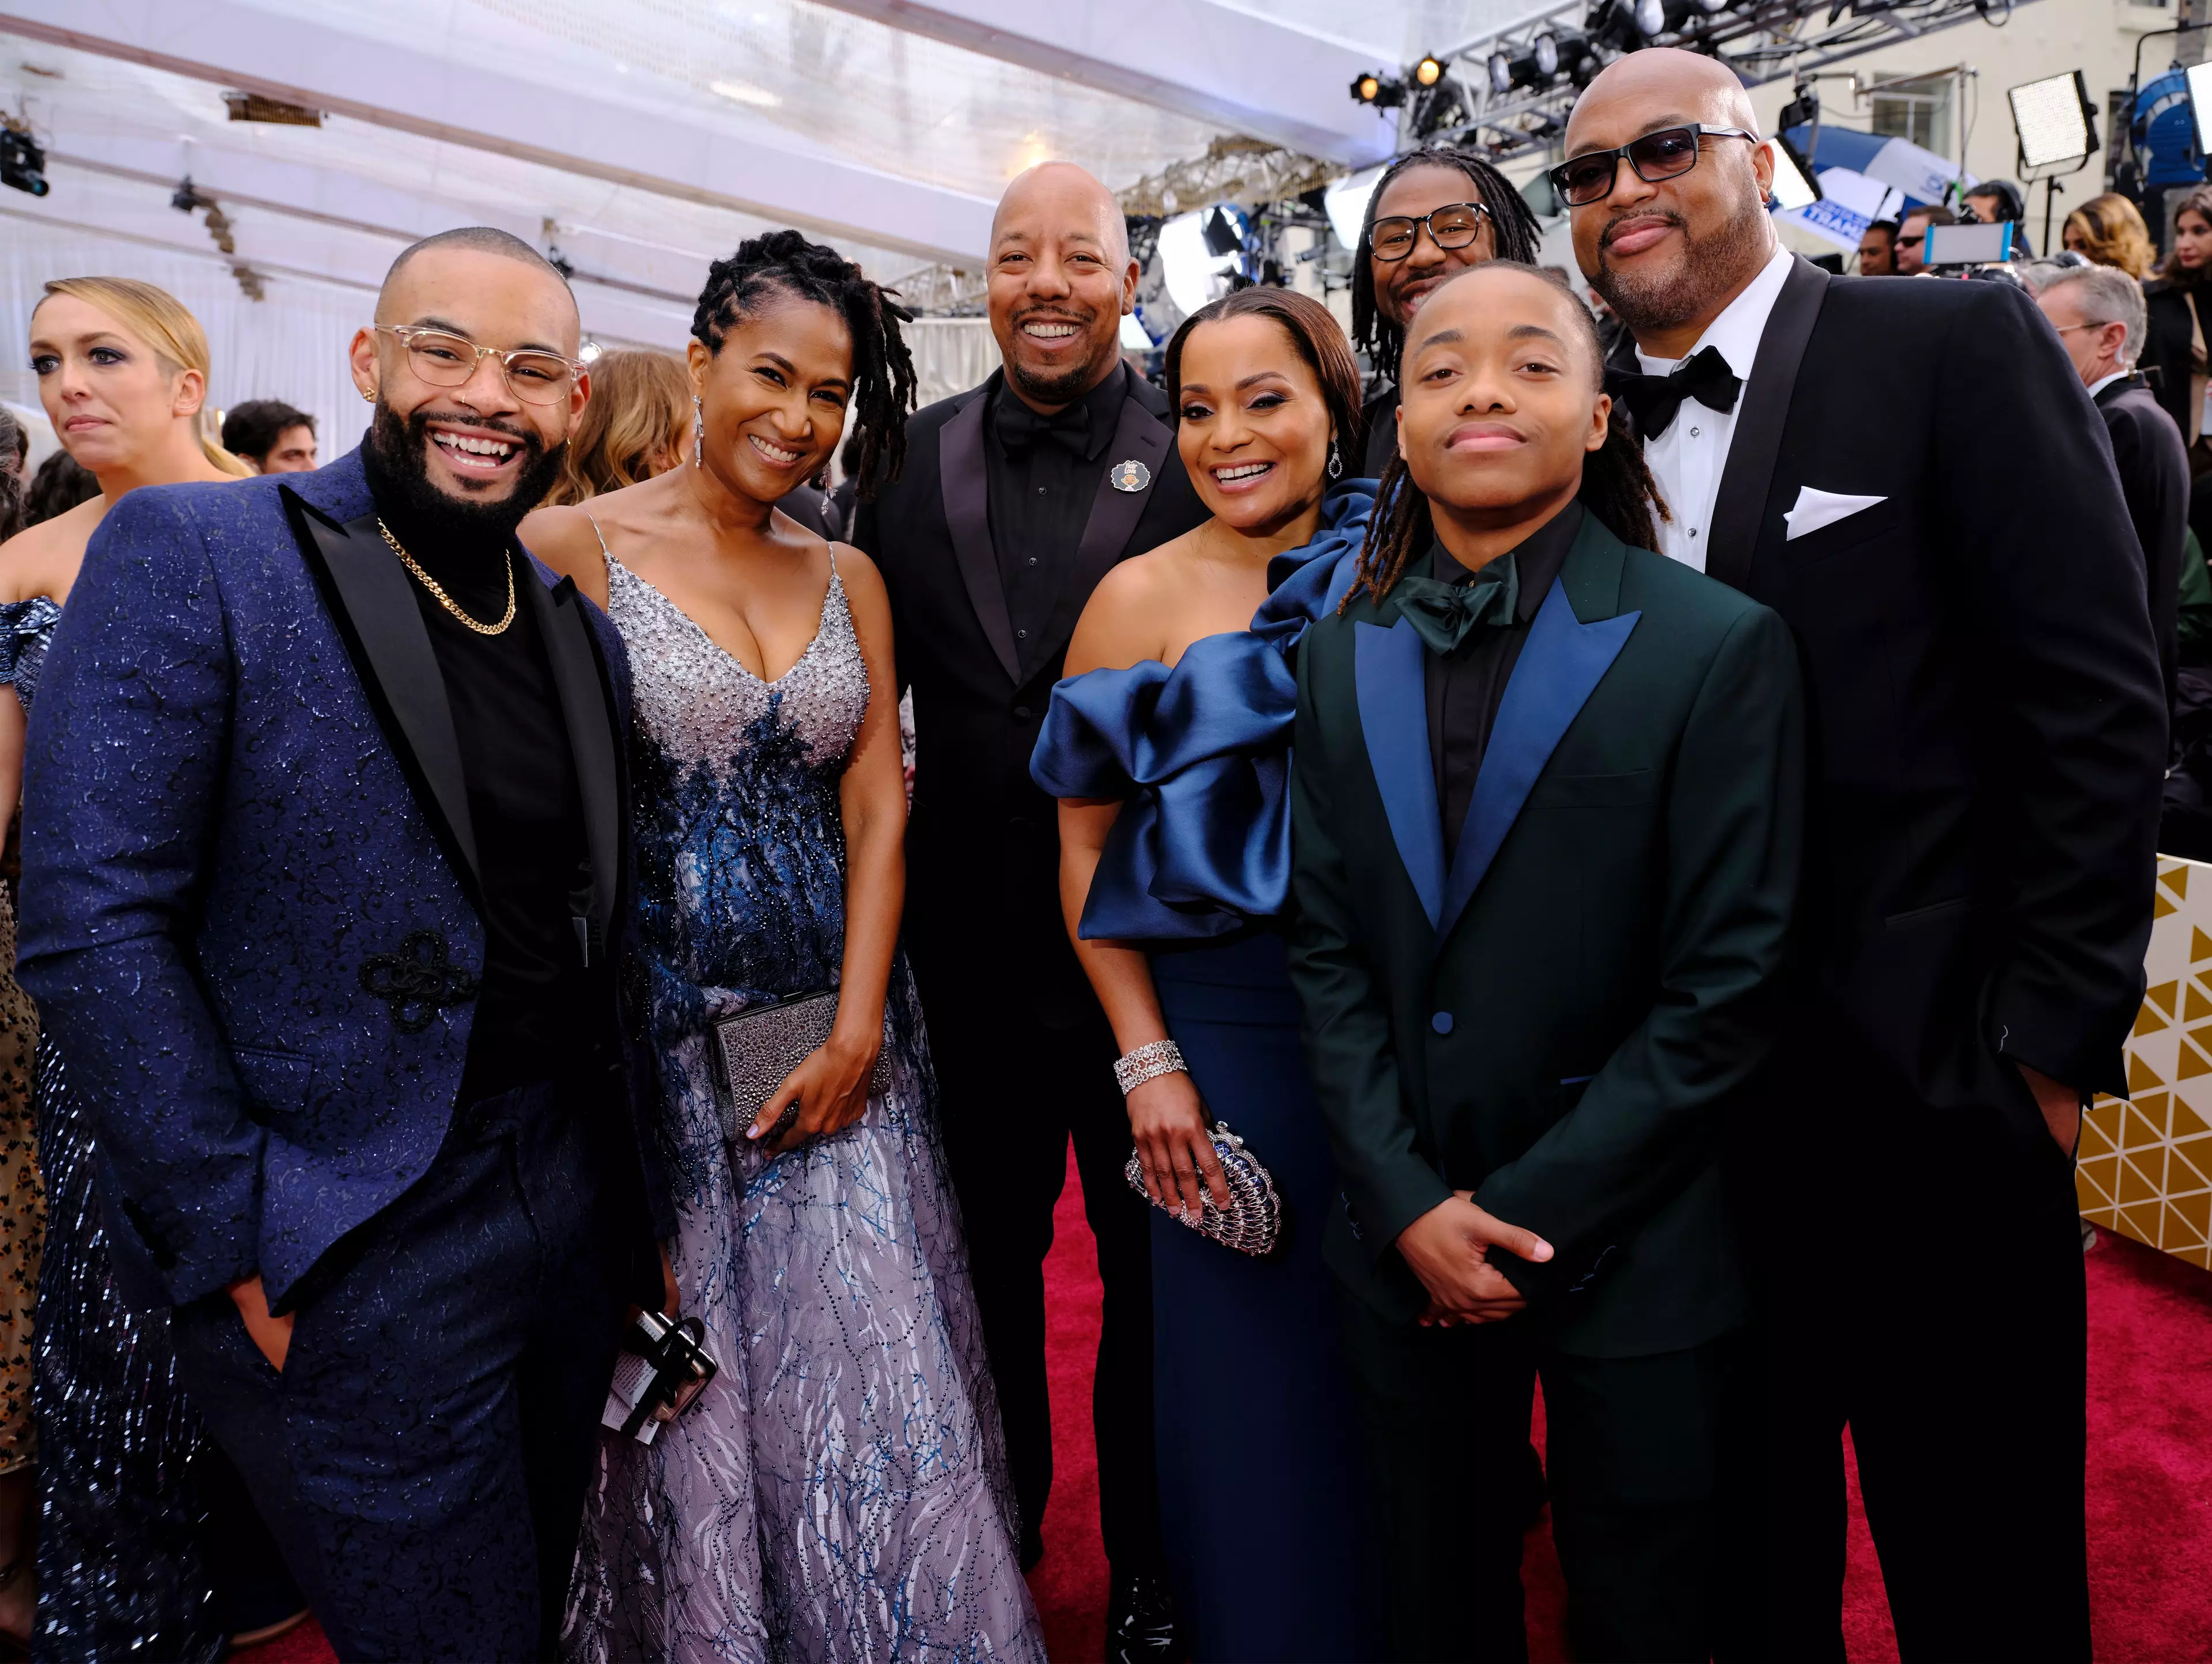 Deandre Arnold (second from right) on the red carpet at the Oscars.